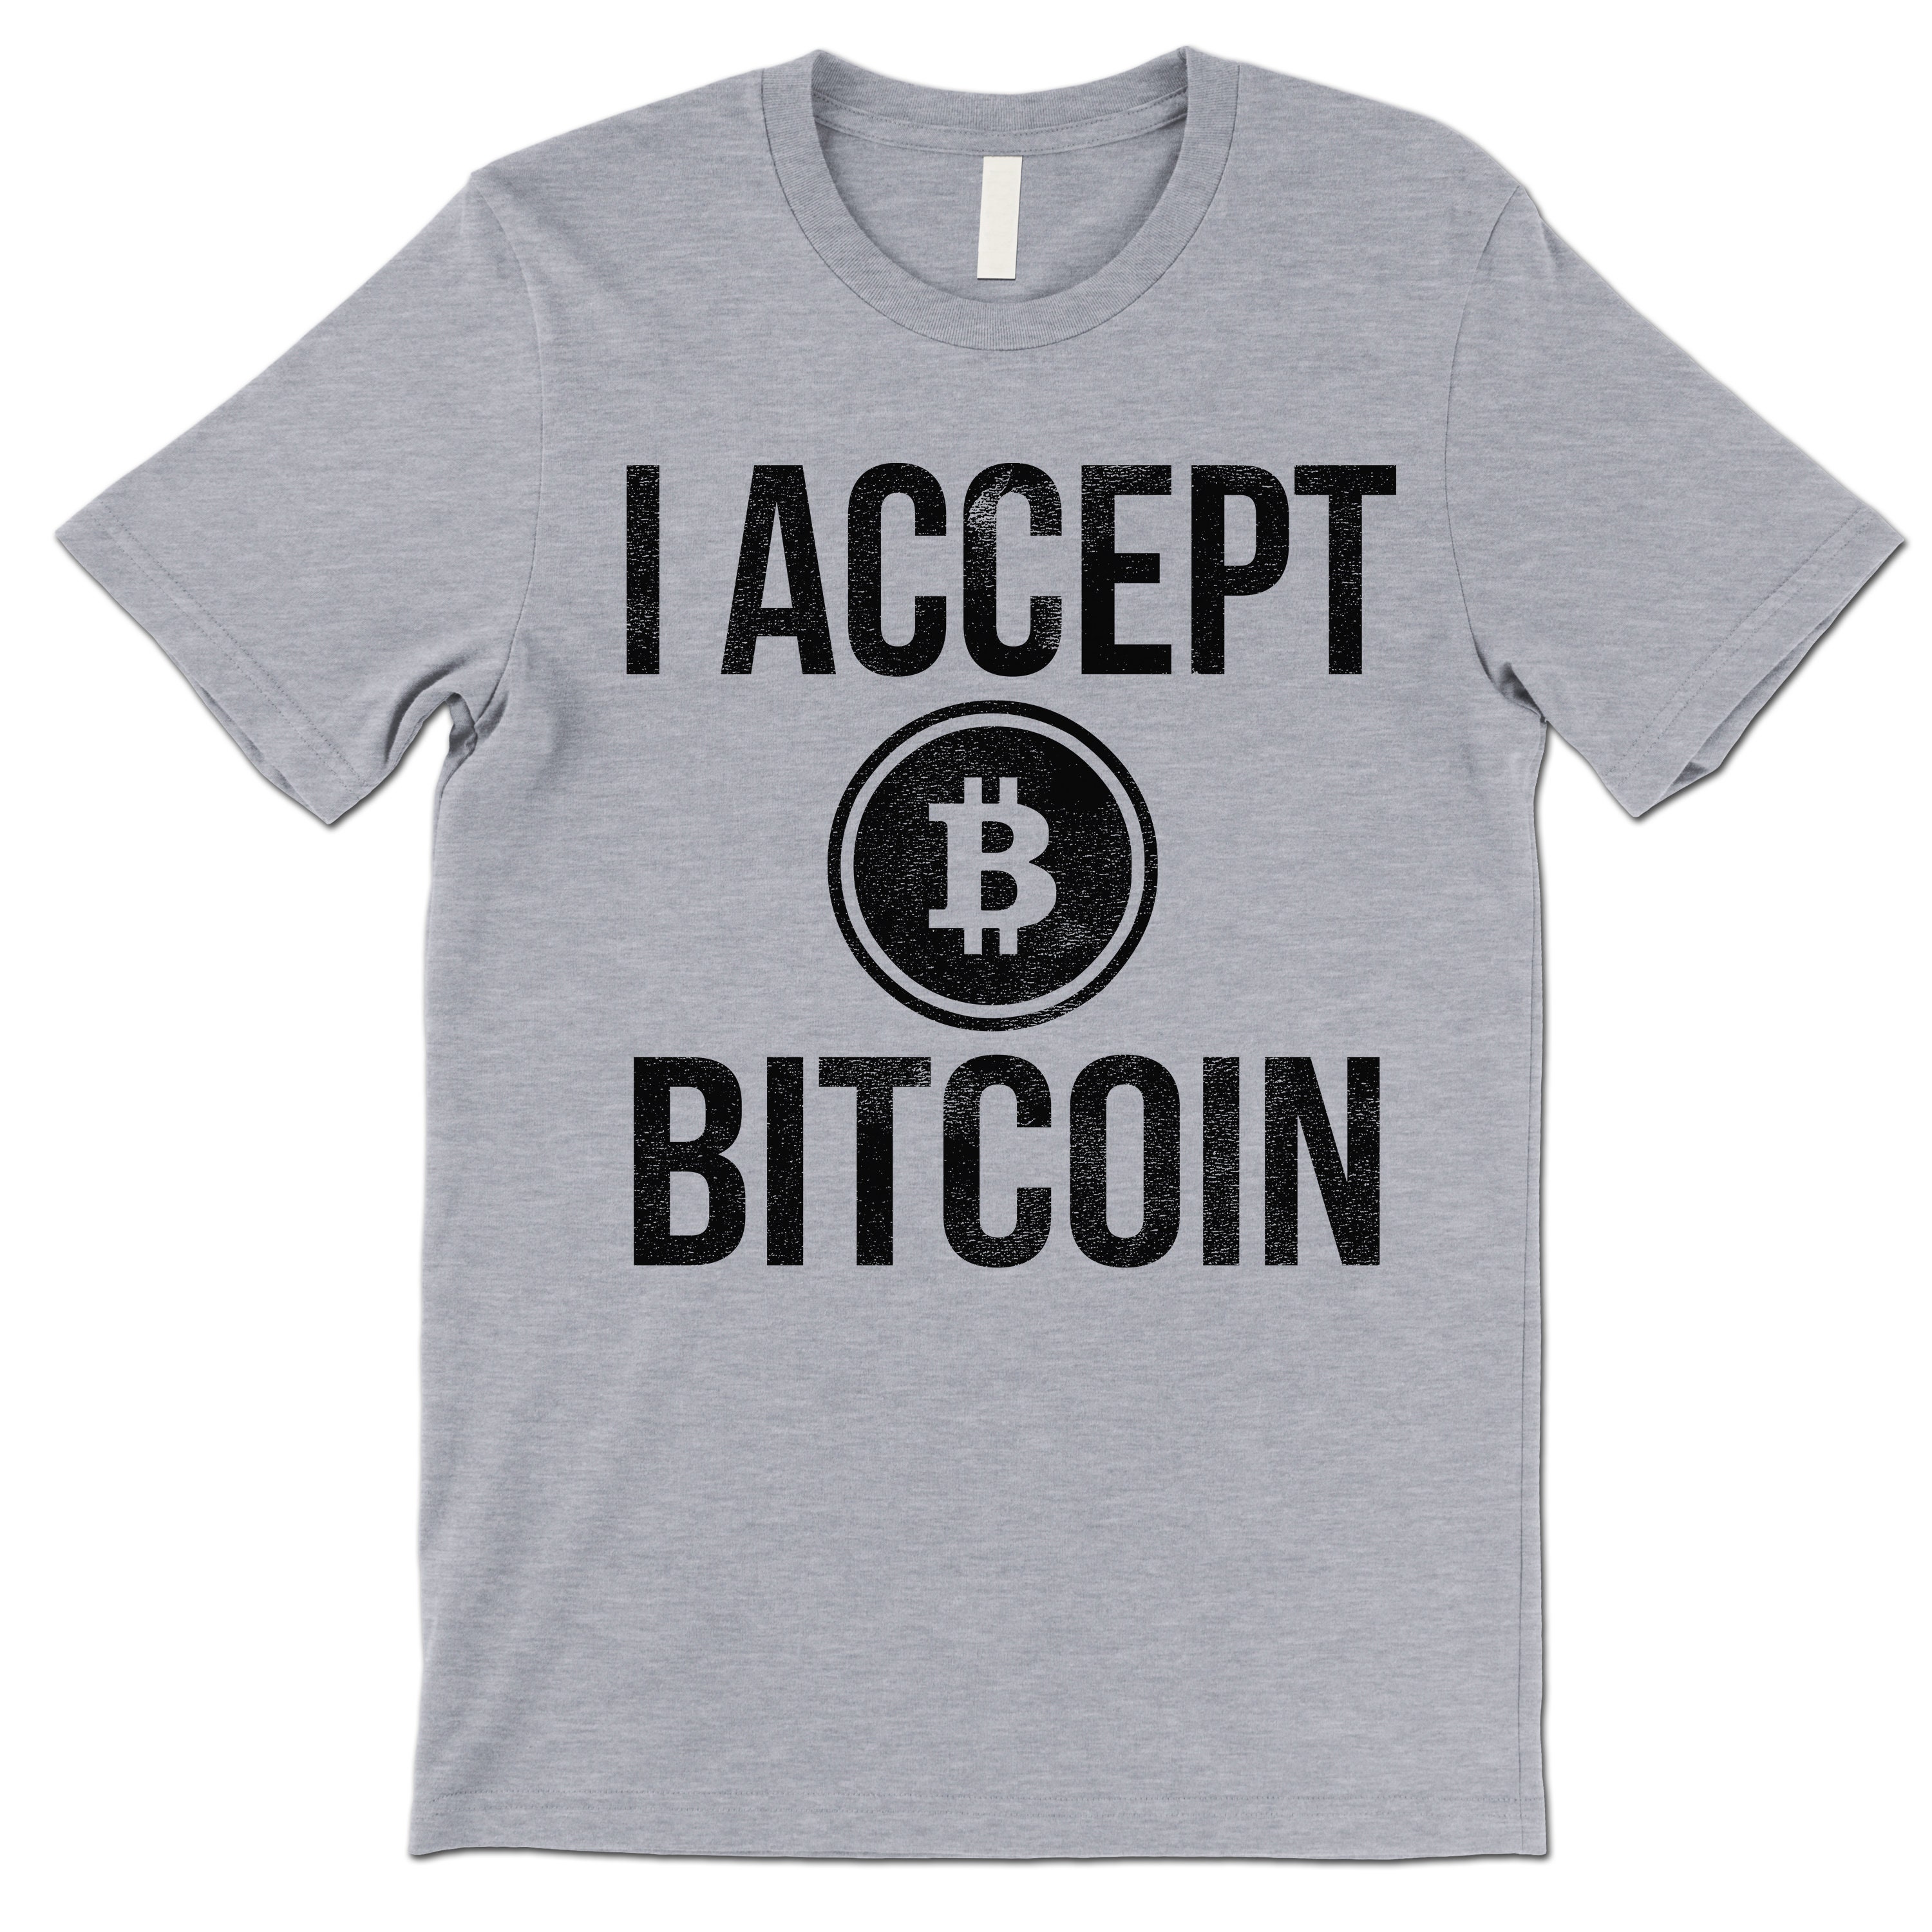 I Accept Bitcoin T Shirt. Funny Cryptocurrency Shirt. - Etsy